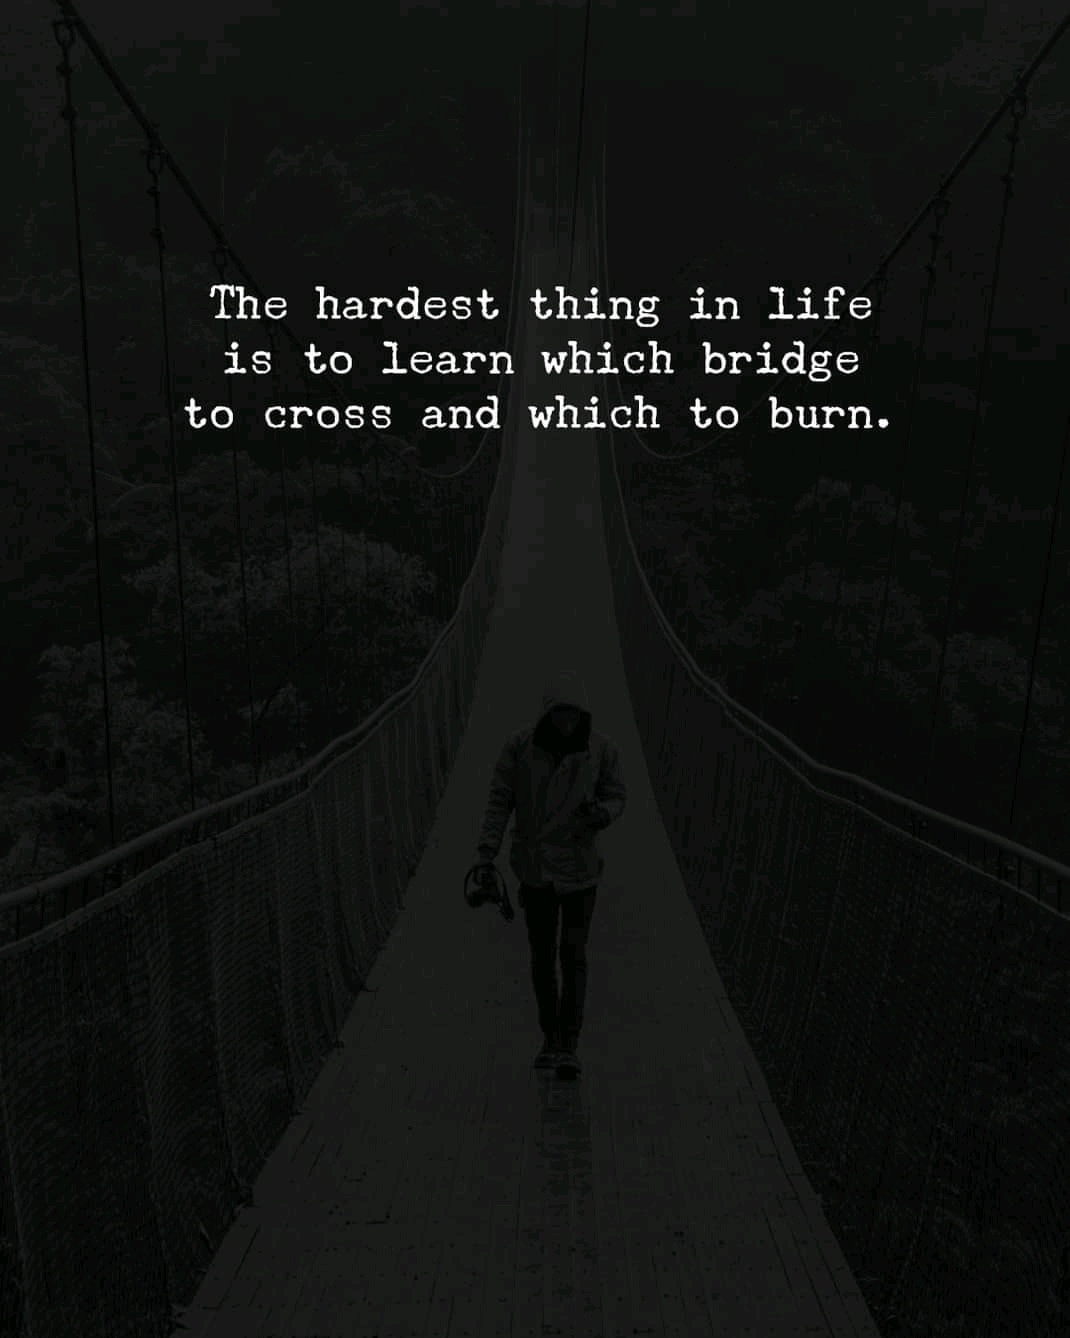 The hardest thing to learn in life is which bridge to cross and which to burn.